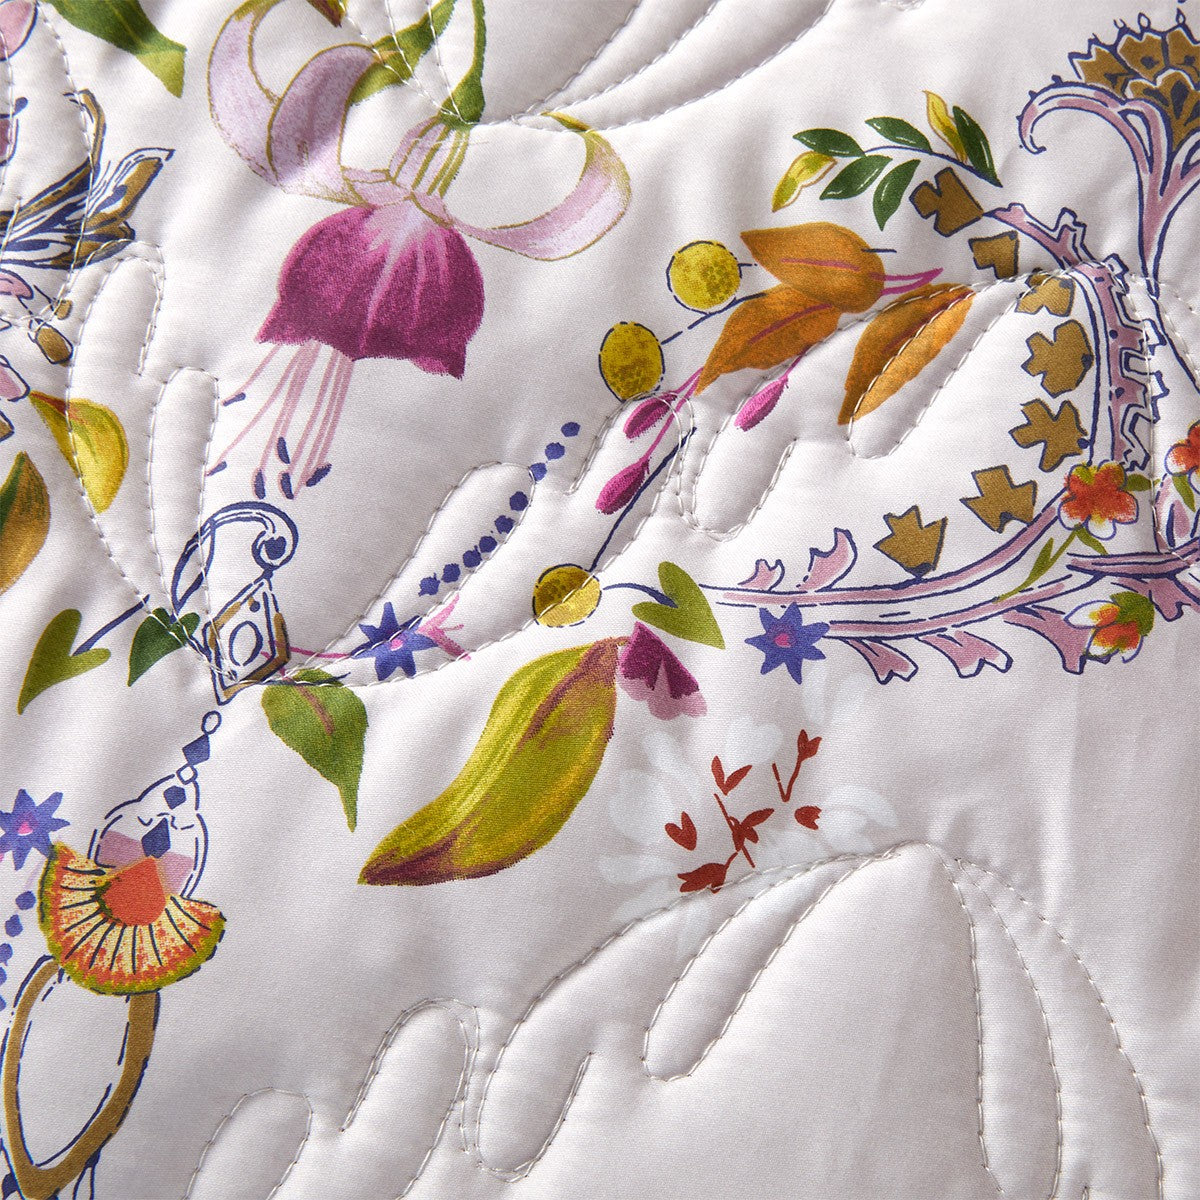 Romances Bed Linens By Yves Delorme